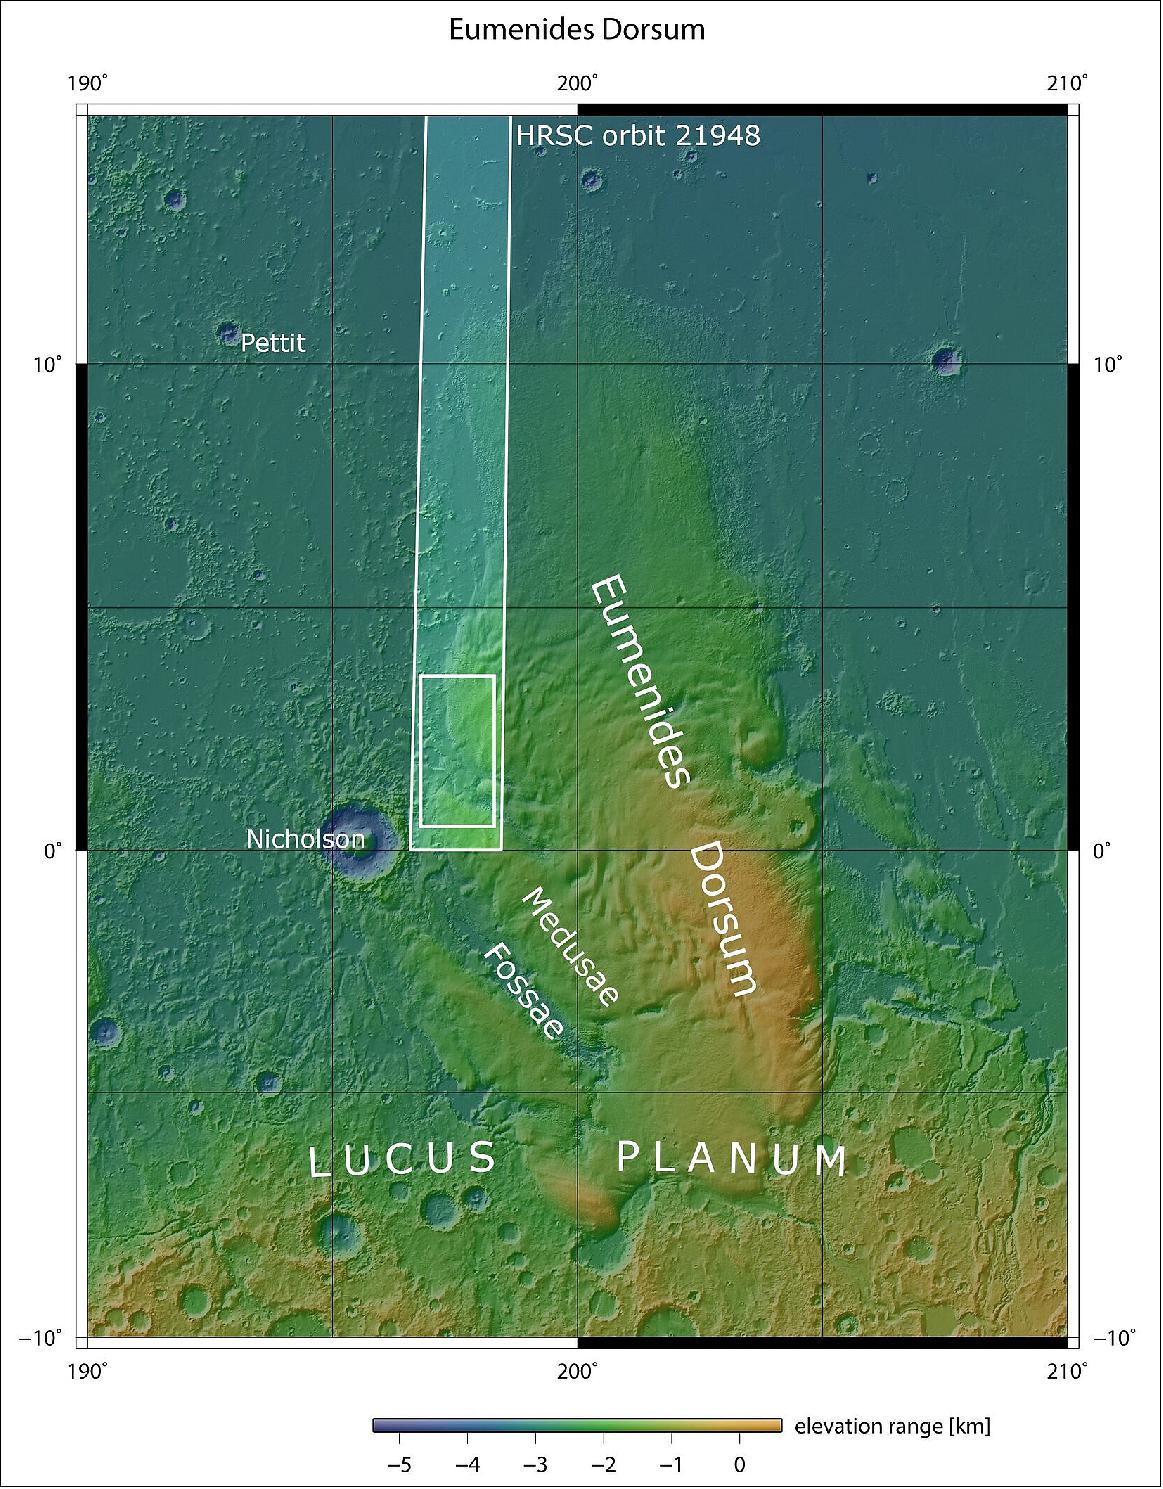 Figure 29: This image shows Medusae Fossae, the largest sedimentary deposit on Mars and an intensely wind-sculpted landscape, in wider context. The area outlined by the bold white box indicates the area imaged by the Mars Express High Resolution Stereo Camera on 14 May 2021 during orbit 21948 [image credit: Topography data by MOLA Science Team, Map compilation by freie Universität Berlin using GMT4 (NASA/MGS/MOLA Science Team)]